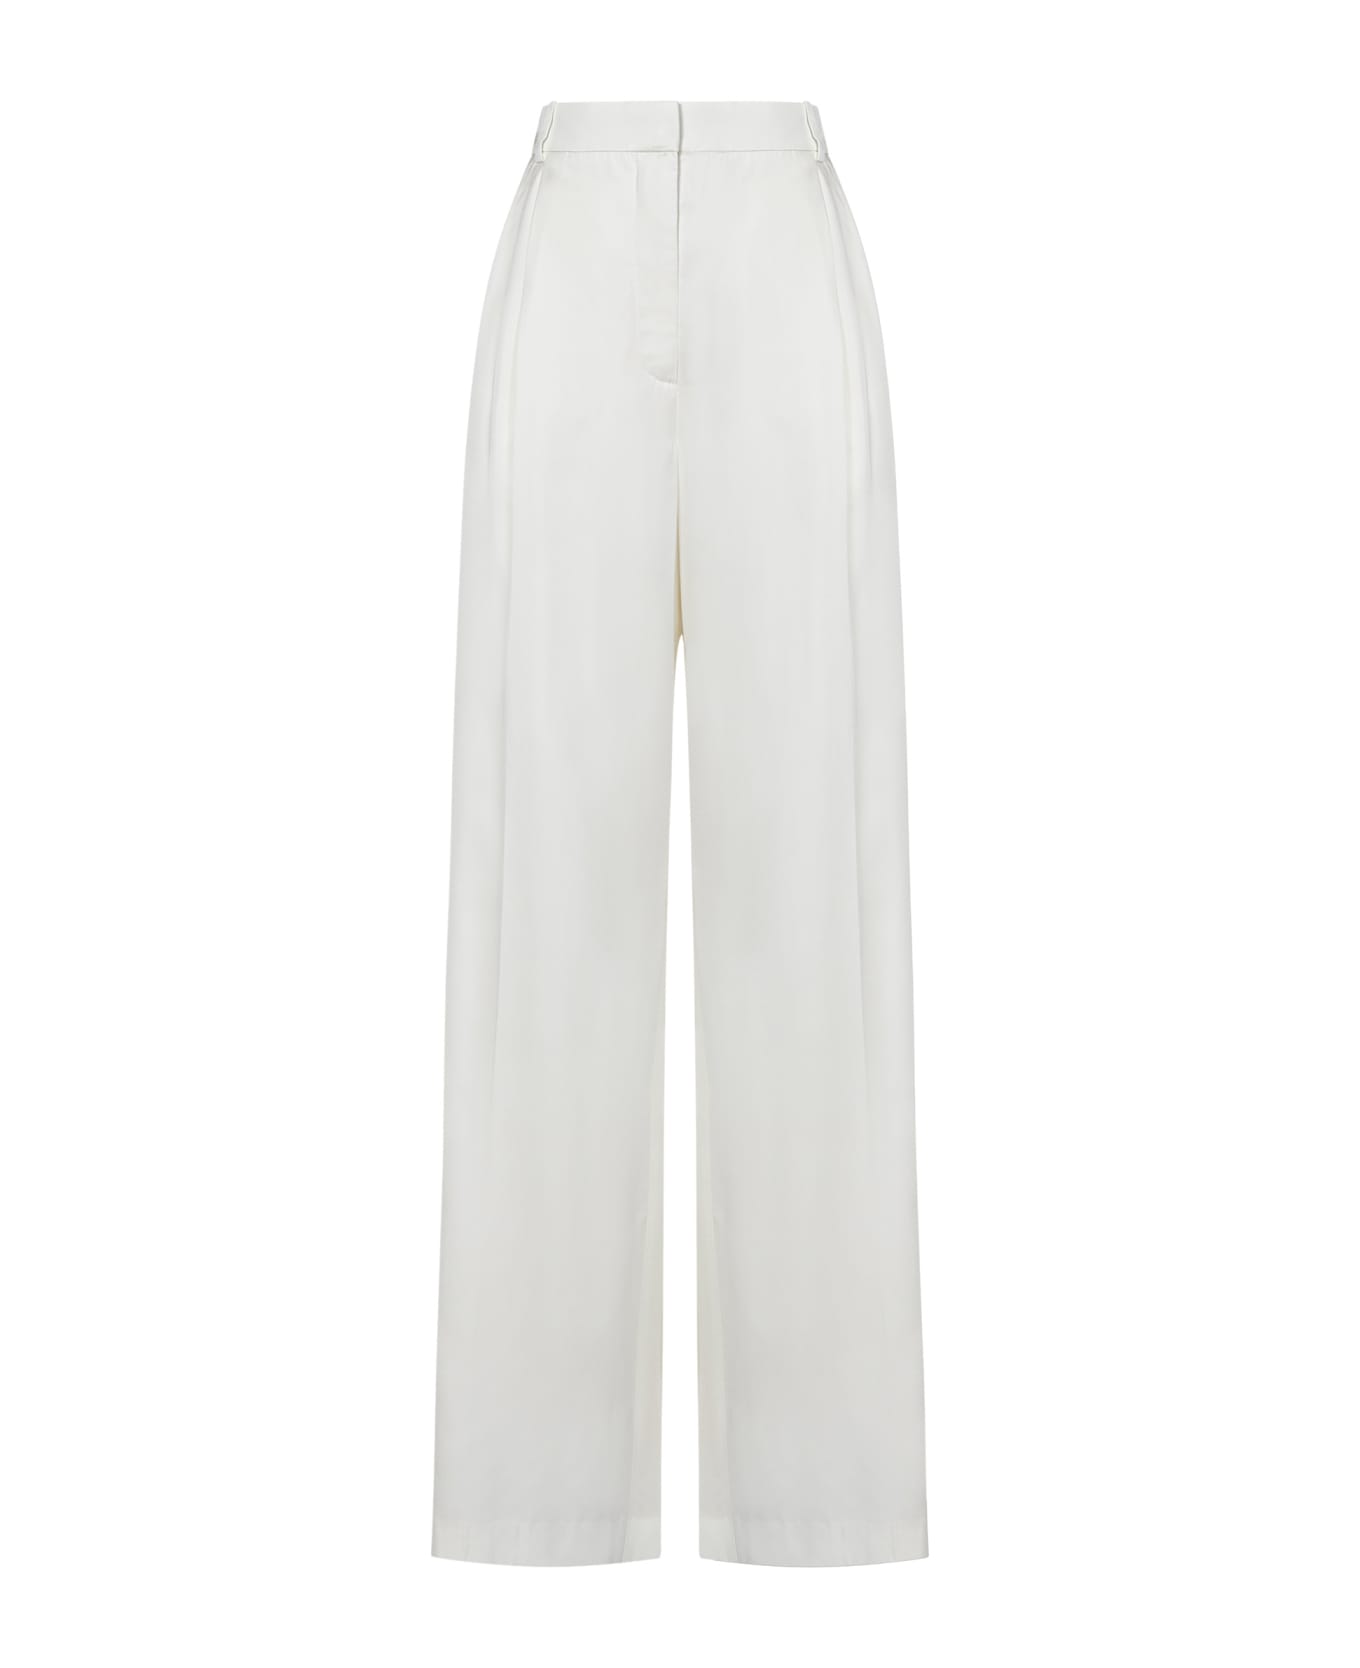 Alexander McQueen Trousers - IVORY ボトムス